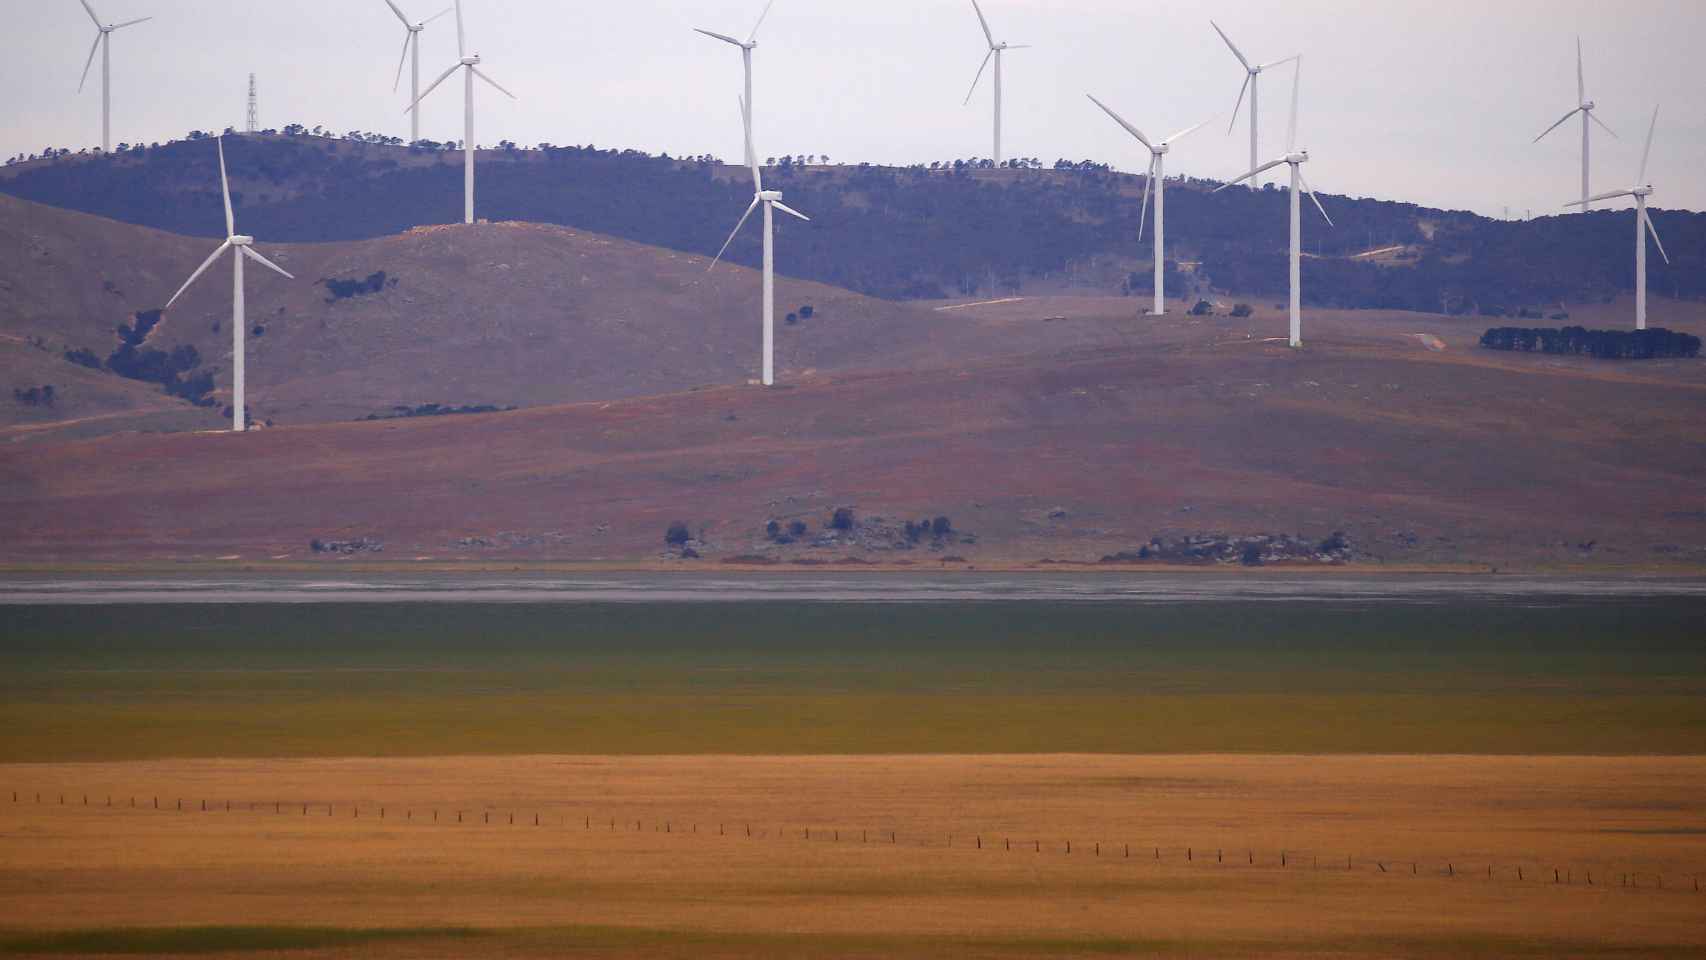 FILE PHOTO: A fence is seen in front of wind turbines that are part of the Infigen Energy Capital Wind Farm located on the hills surrounding Lake George, near the Australian capital city of Canberra